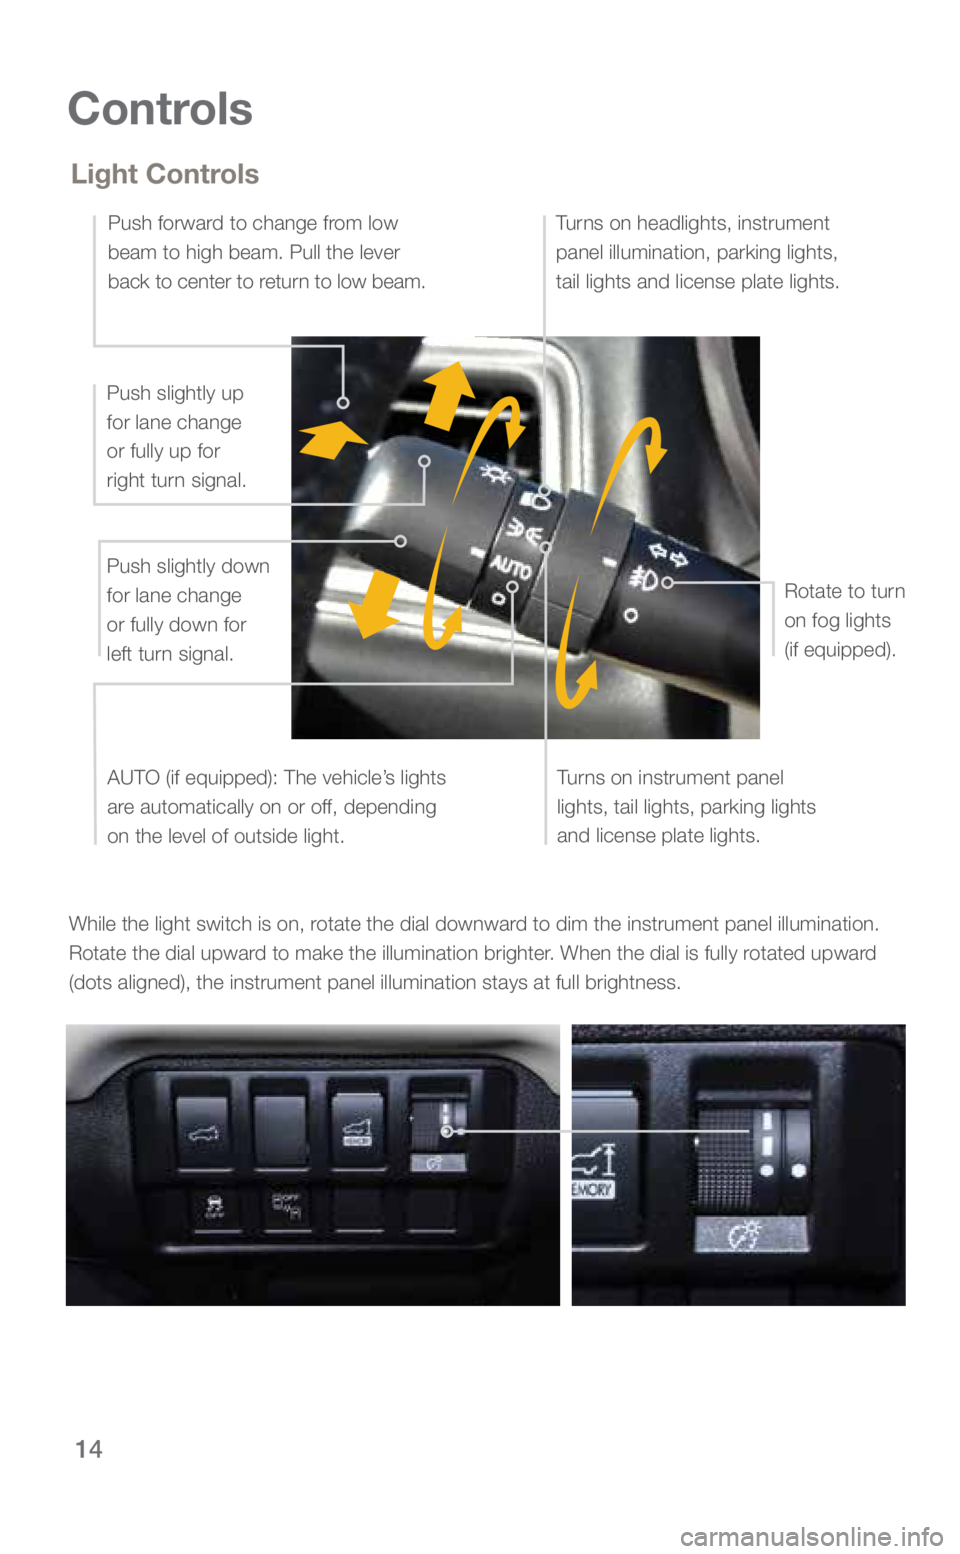 SUBARU ASCENT 2019  Quick Guide 14
Controls
While the light switch is on, rotate the dial downward to dim the instrument panel illumination. 
Rotate the dial upward to make the illumination brighter. When the dial is fully rotated u